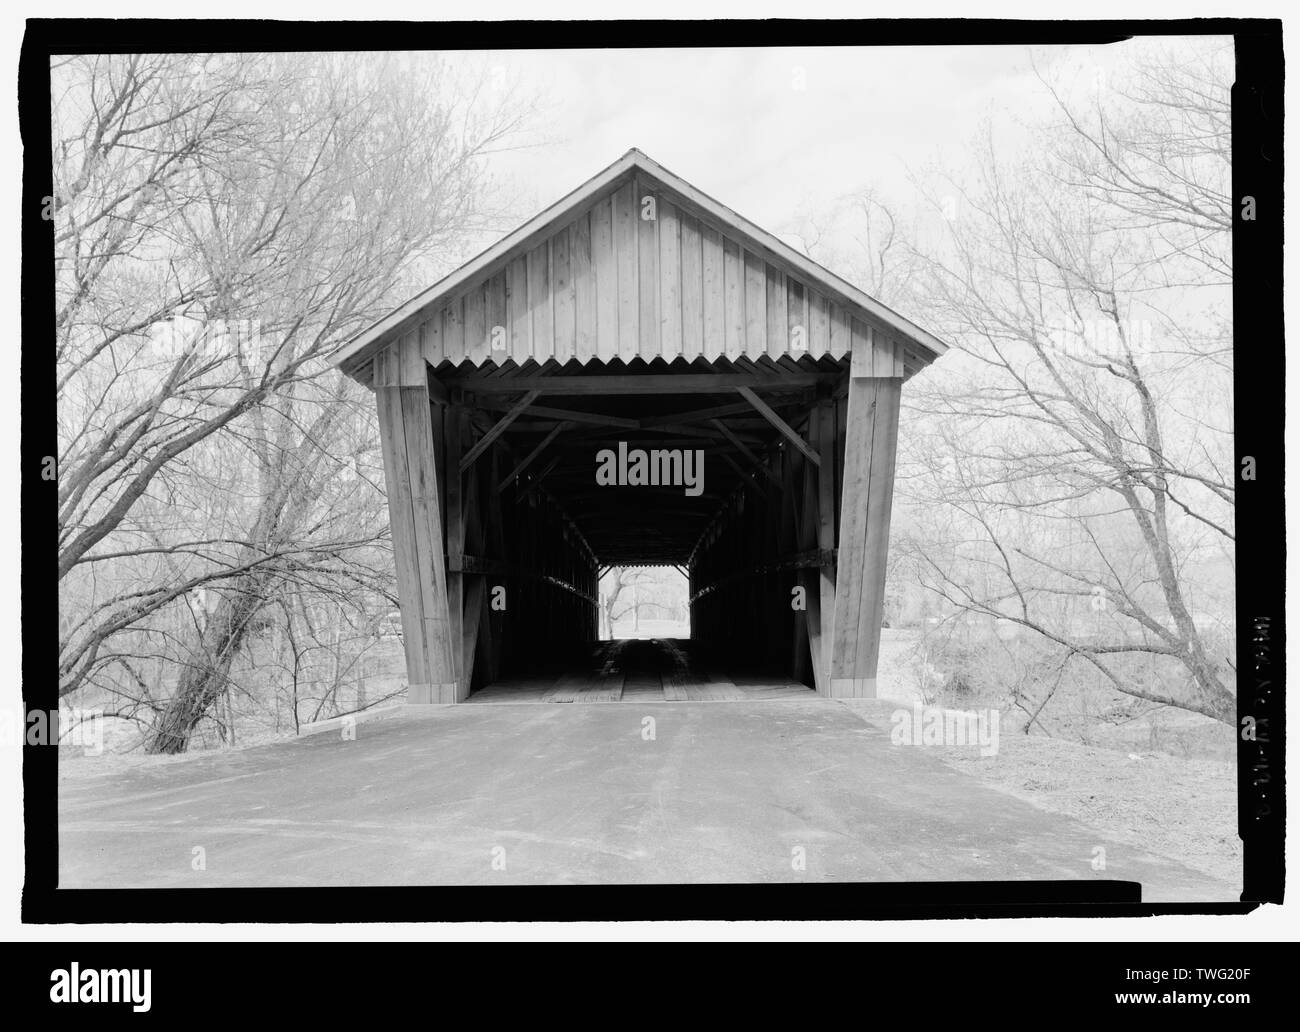 Portal elevation. - Bennett's Mill Bridge, Spanning Tygart's Creek, East Tygart's Creek Road (CR 1215), Lynn, Greenup County, KY; Bennett, B F; Reid, A L; Wheeler, Isaac Hastings; Wheeler, William; McGee, E A; Darlington, Joseph; Darlington, Gabriel; Bennett, William  P; Bennett, Benjamin  F; Federal Highway Association; Bower Bridge Company; Bower, Louis; Intech Contracting; Marston, Christopher, project manager; Christianson, Justine, transmitter; Federal Highway Administration, sponsor Stock Photo